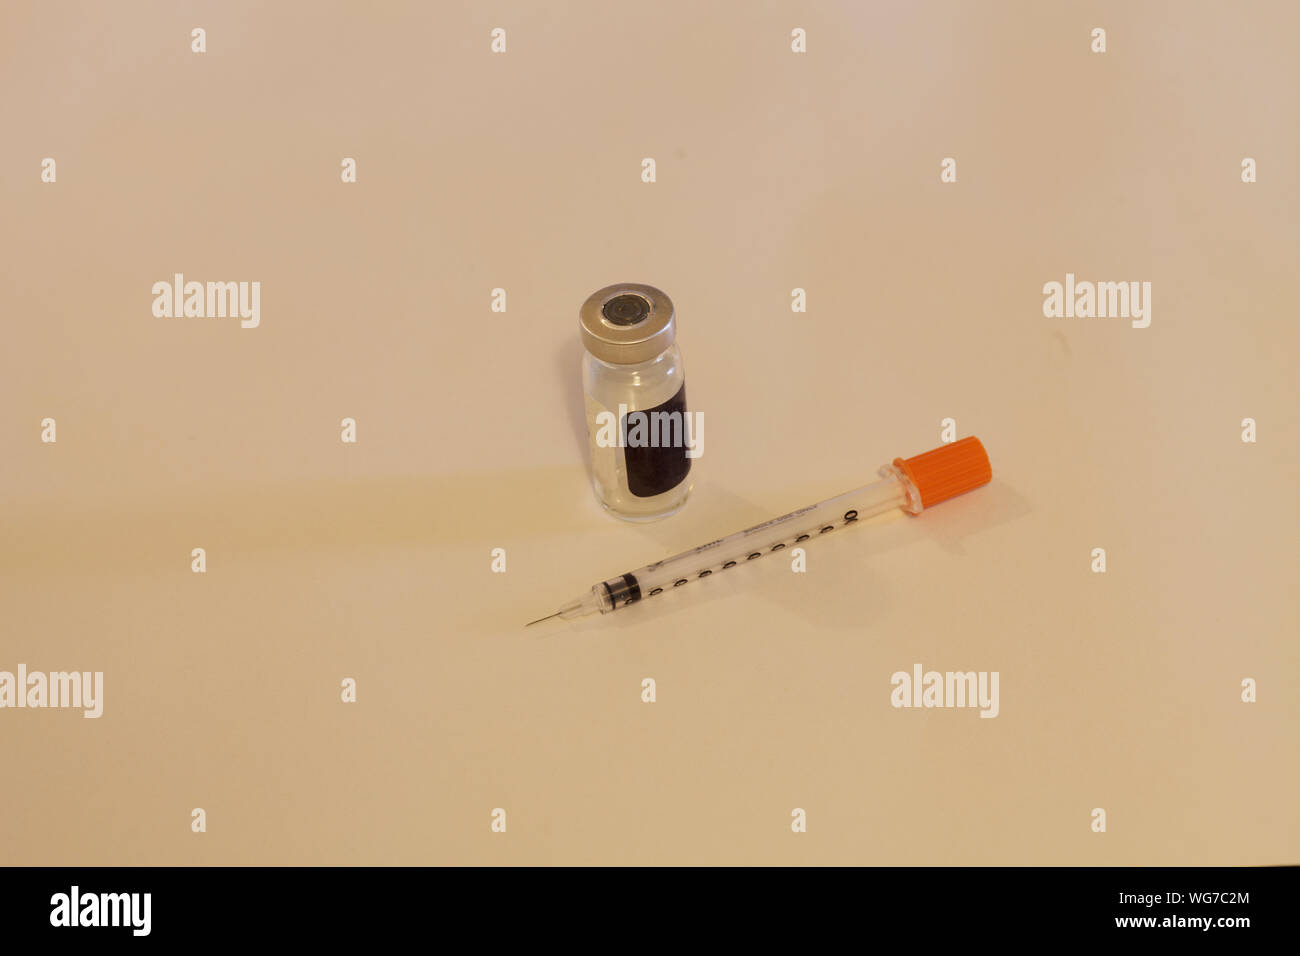 High Angle View Of Syringe And Medicine Bottle On Beige Background Stock Photo